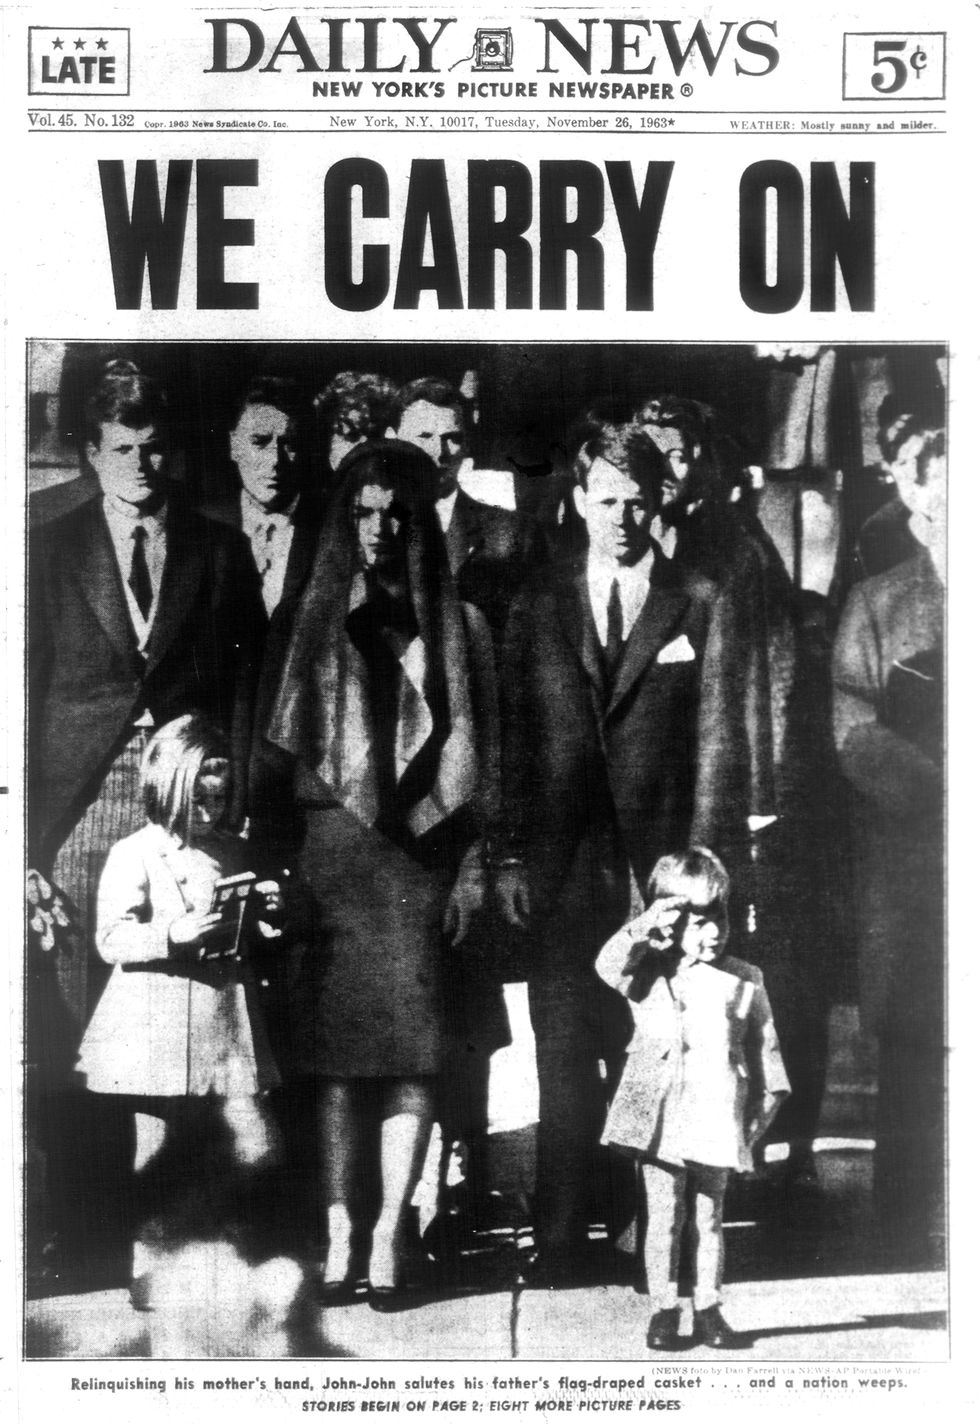 front page of the daily news dated nov 26, 1963, headline 